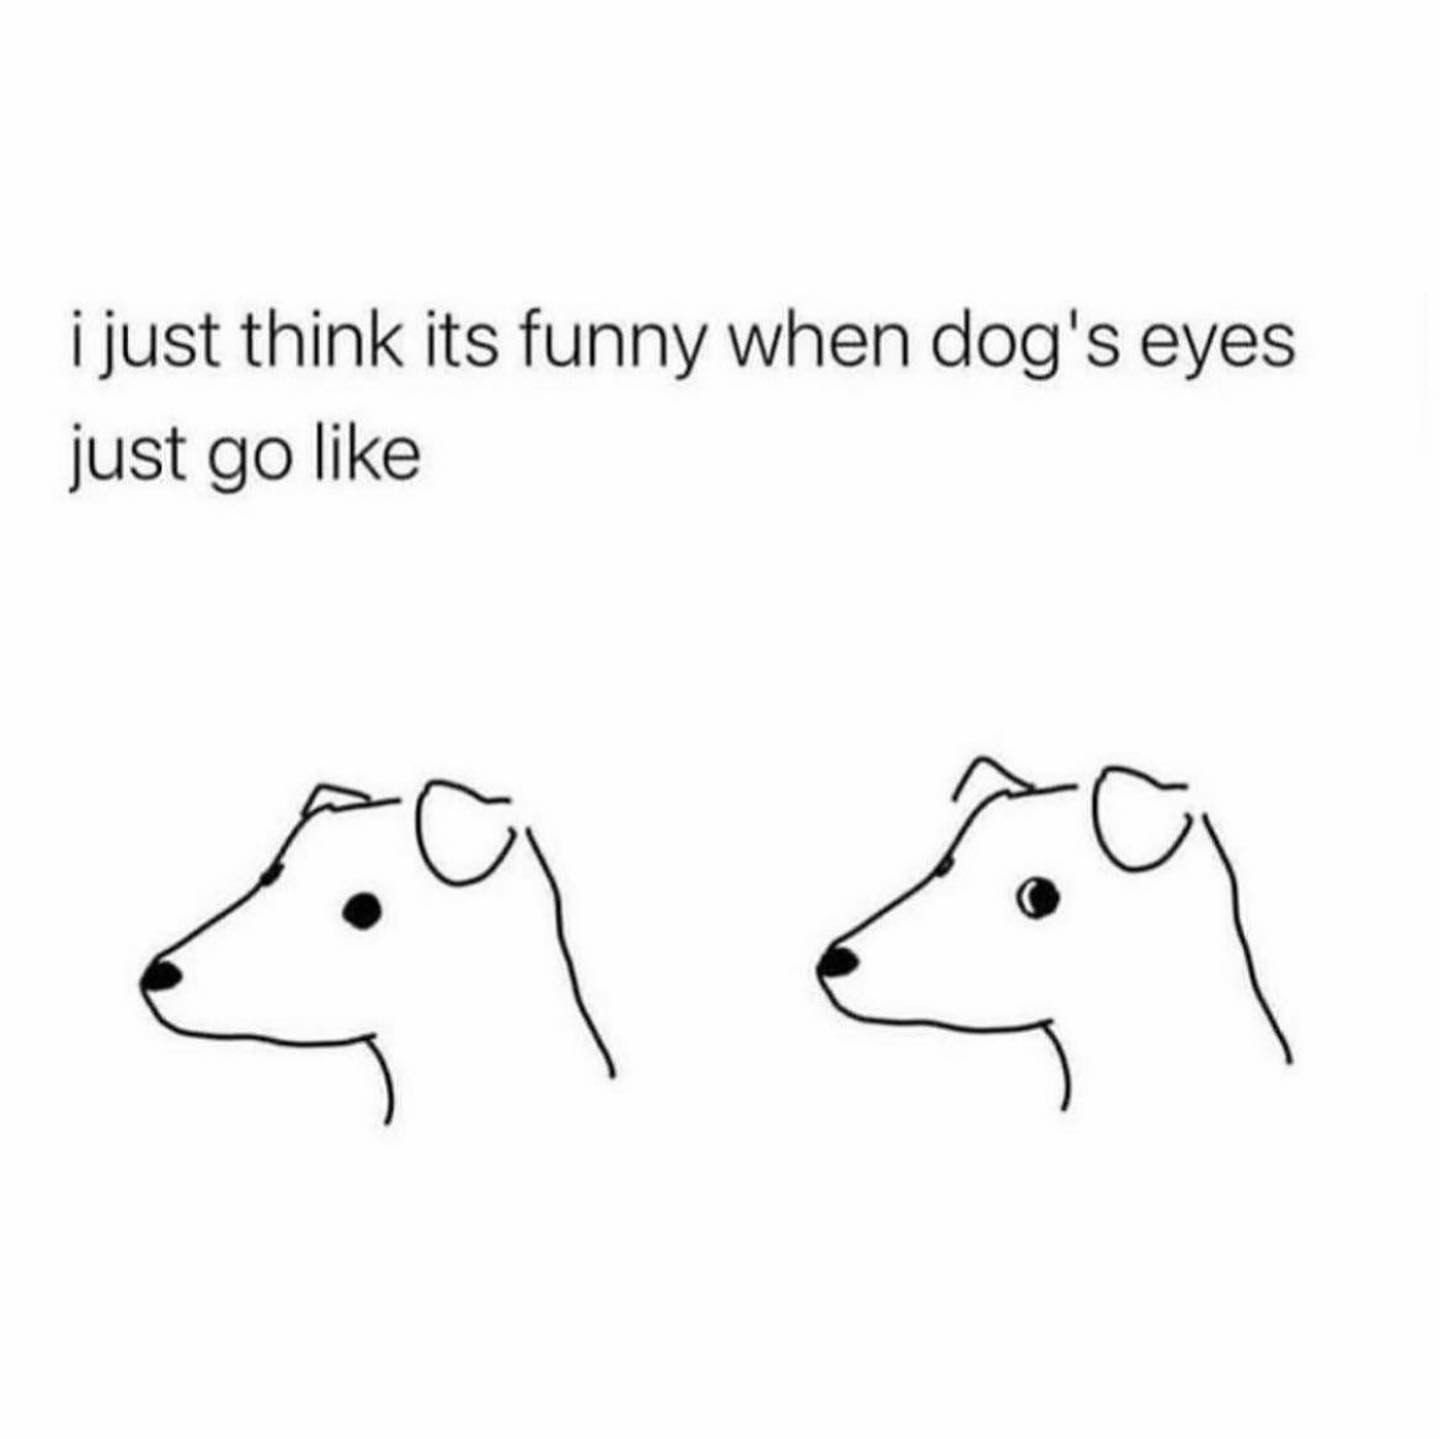 I just think its funny when dog's eyes just go like.